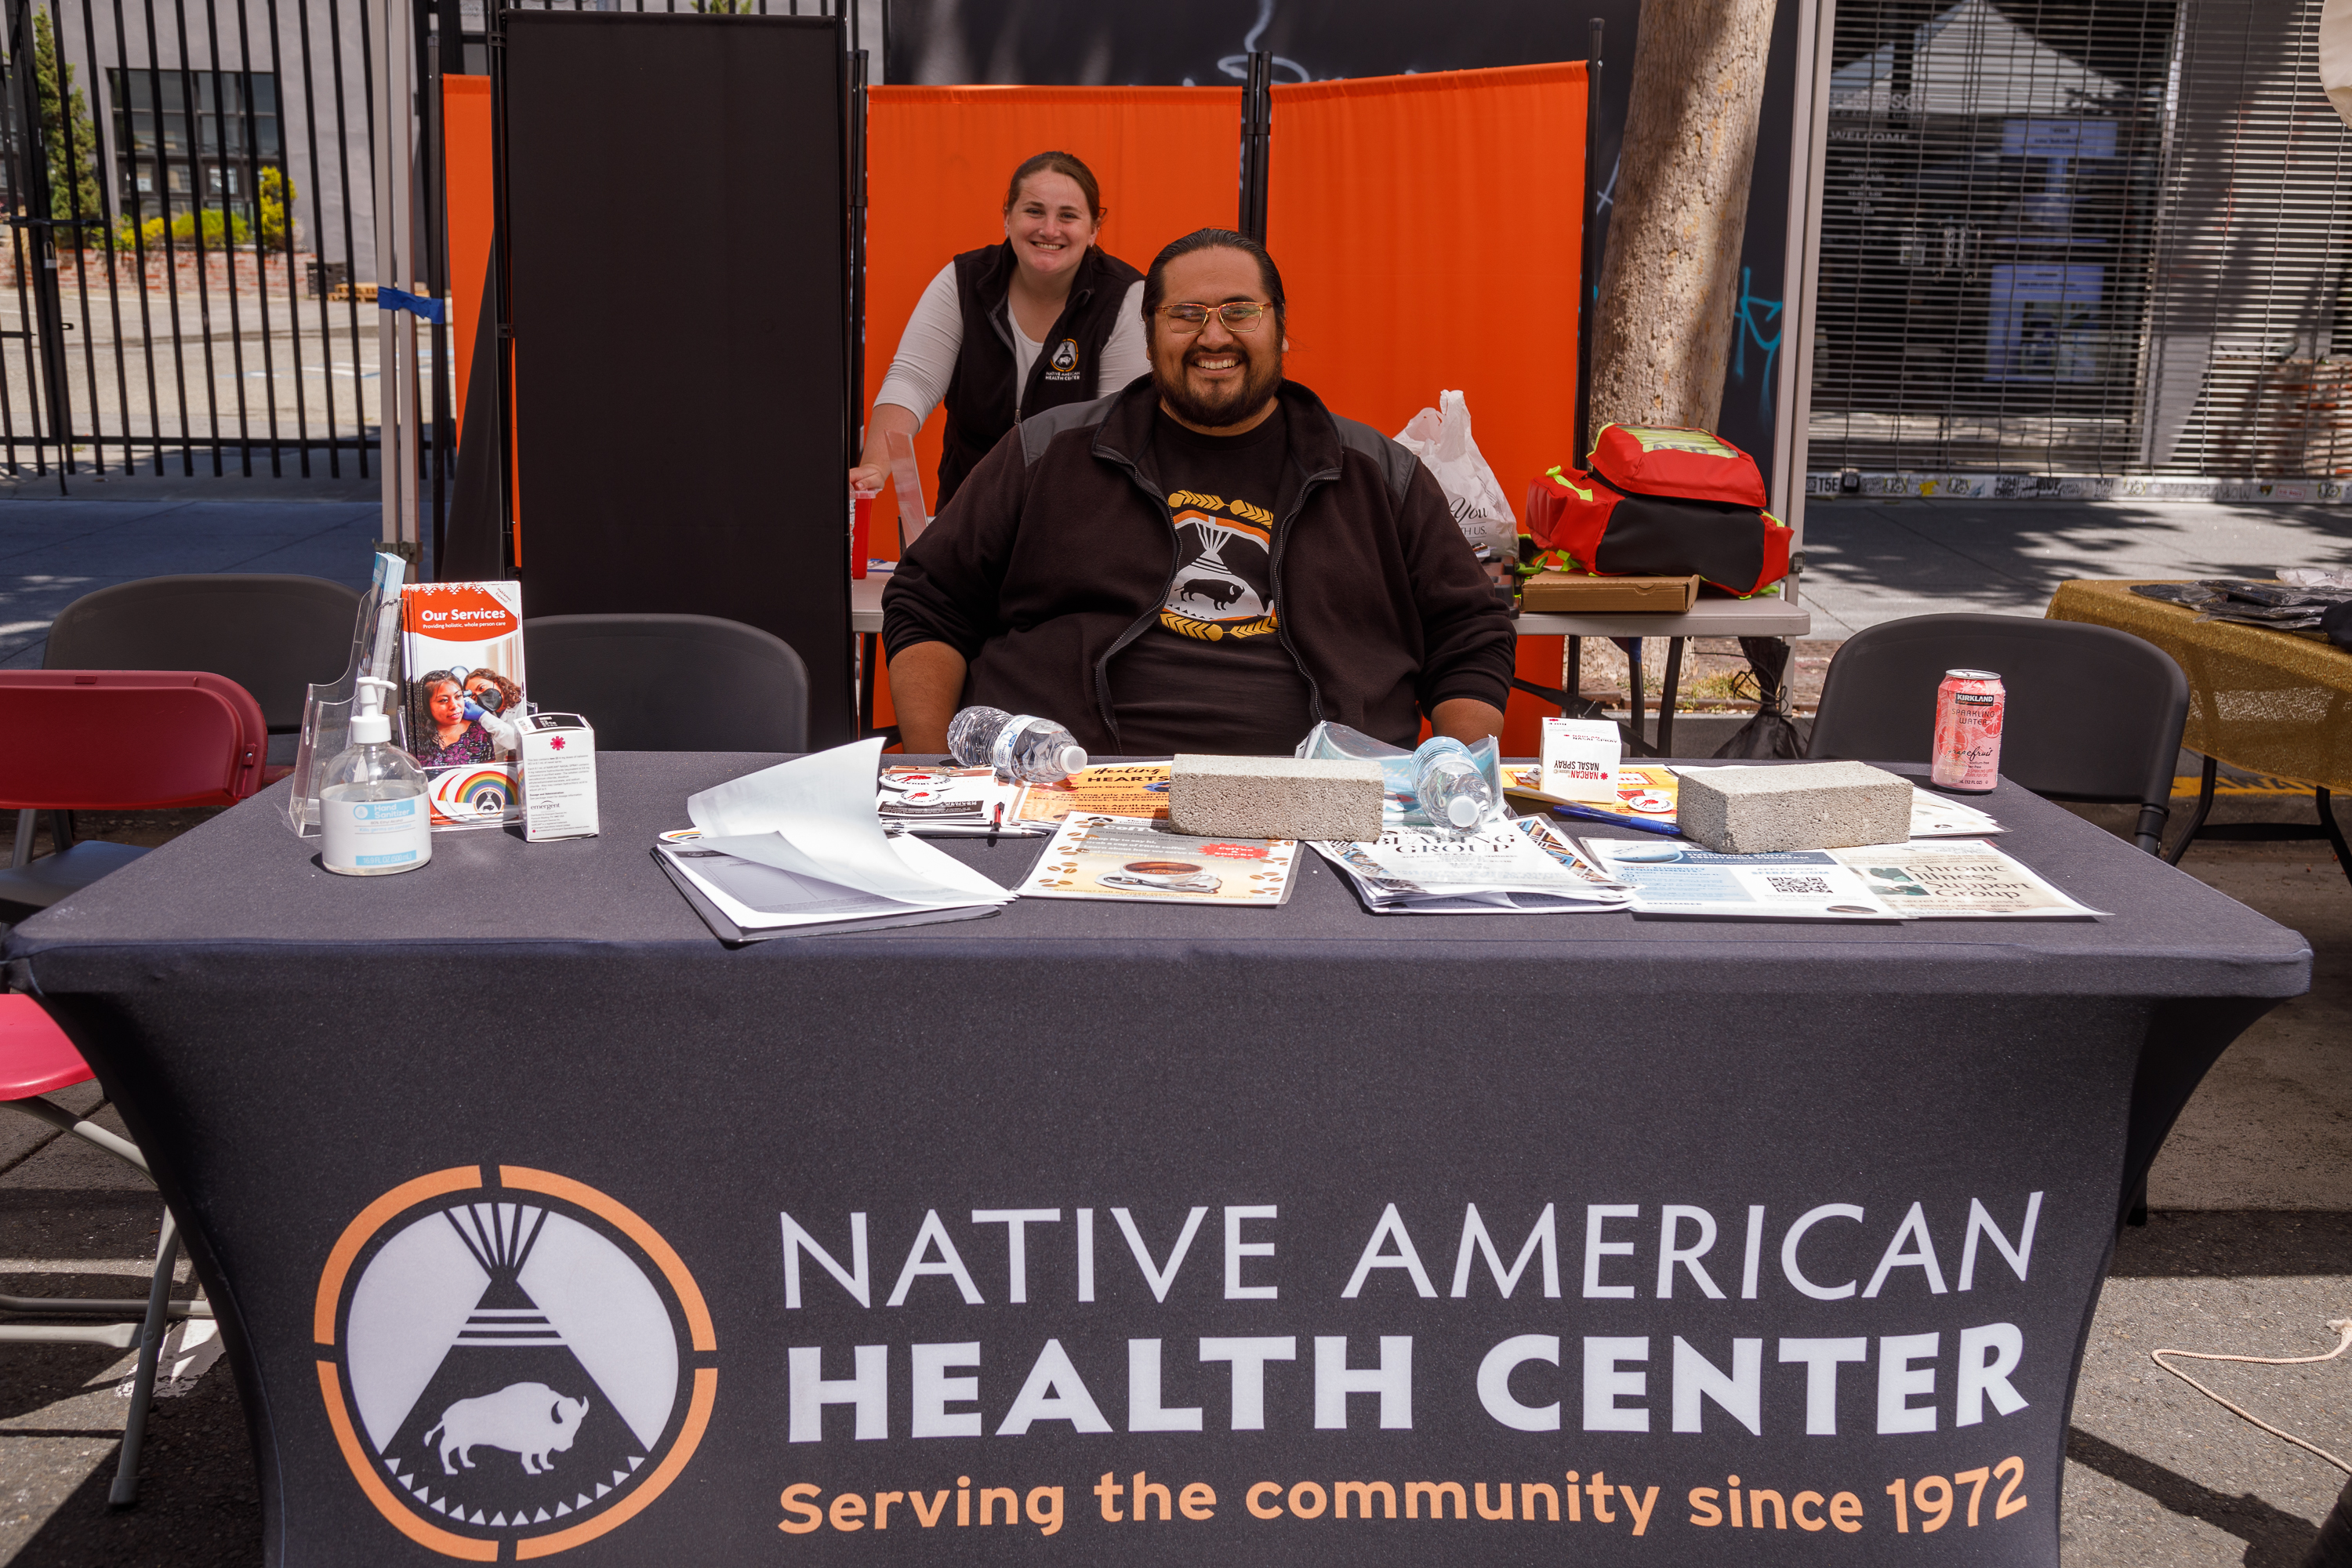 Two people staff a booth for the Native American Health Center, adorned with informational materials and a banner.